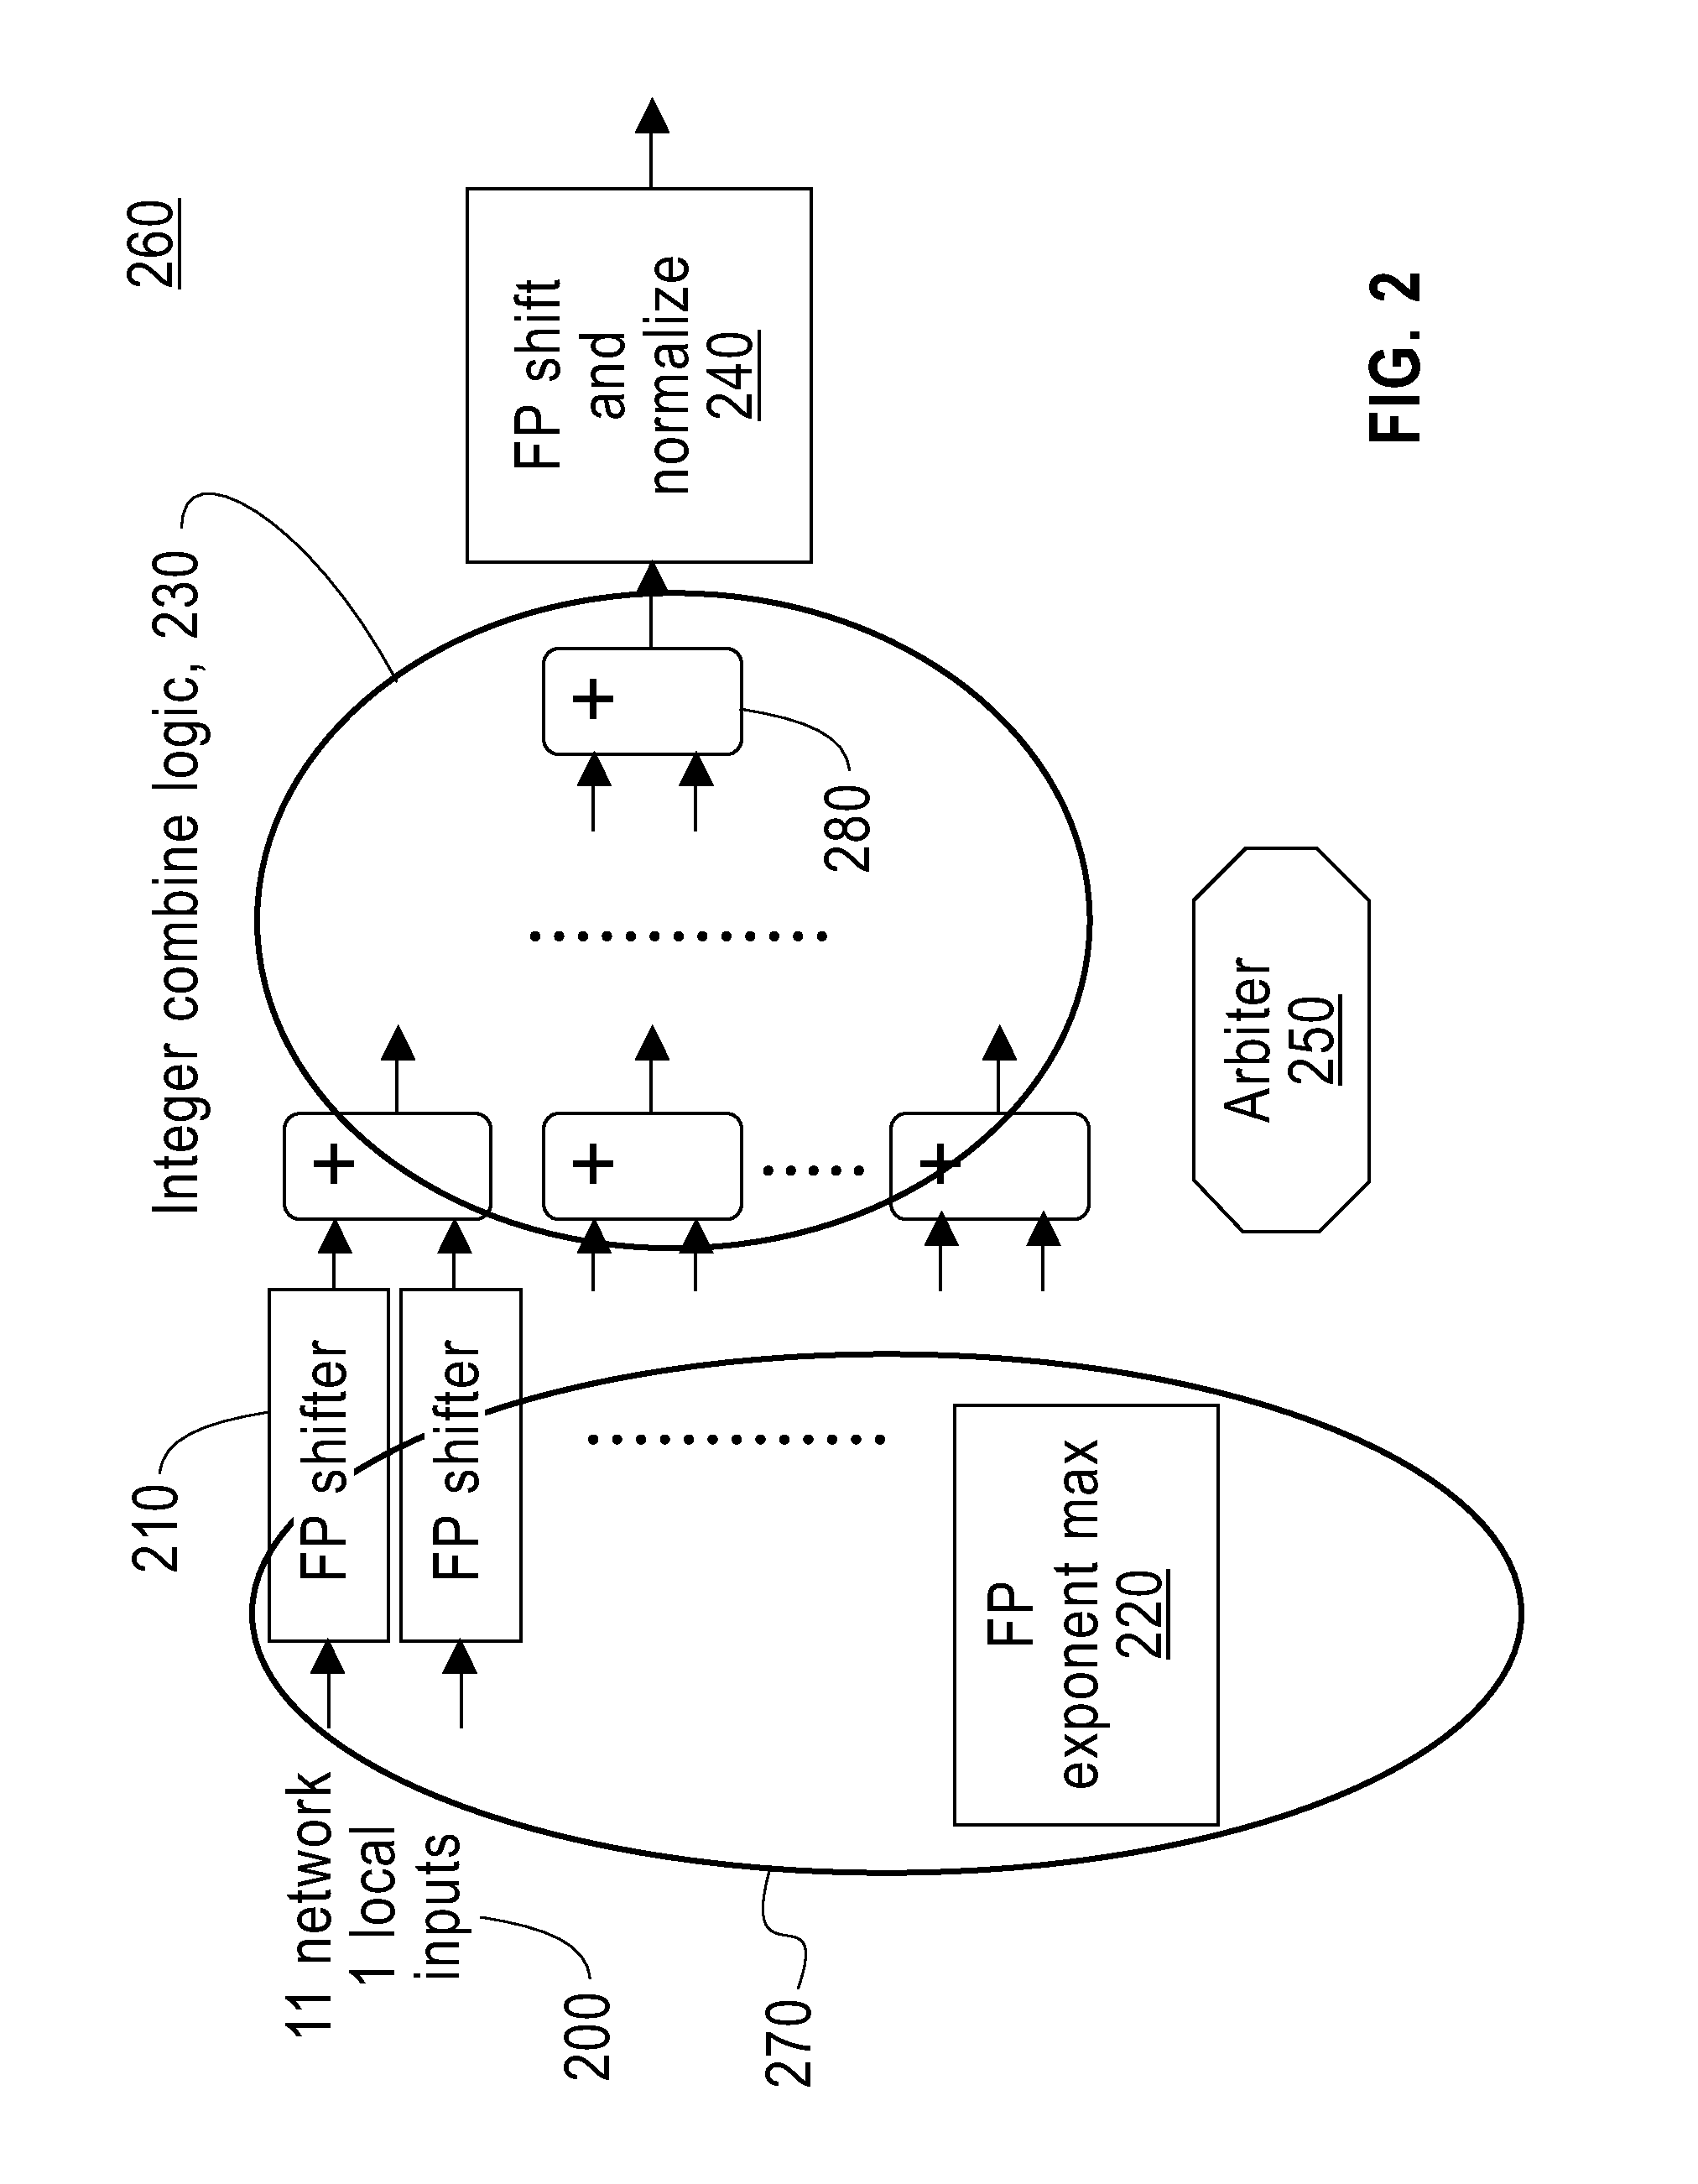 Multi-input and binary reproducible, high bandwidth floating point adder in a collective network